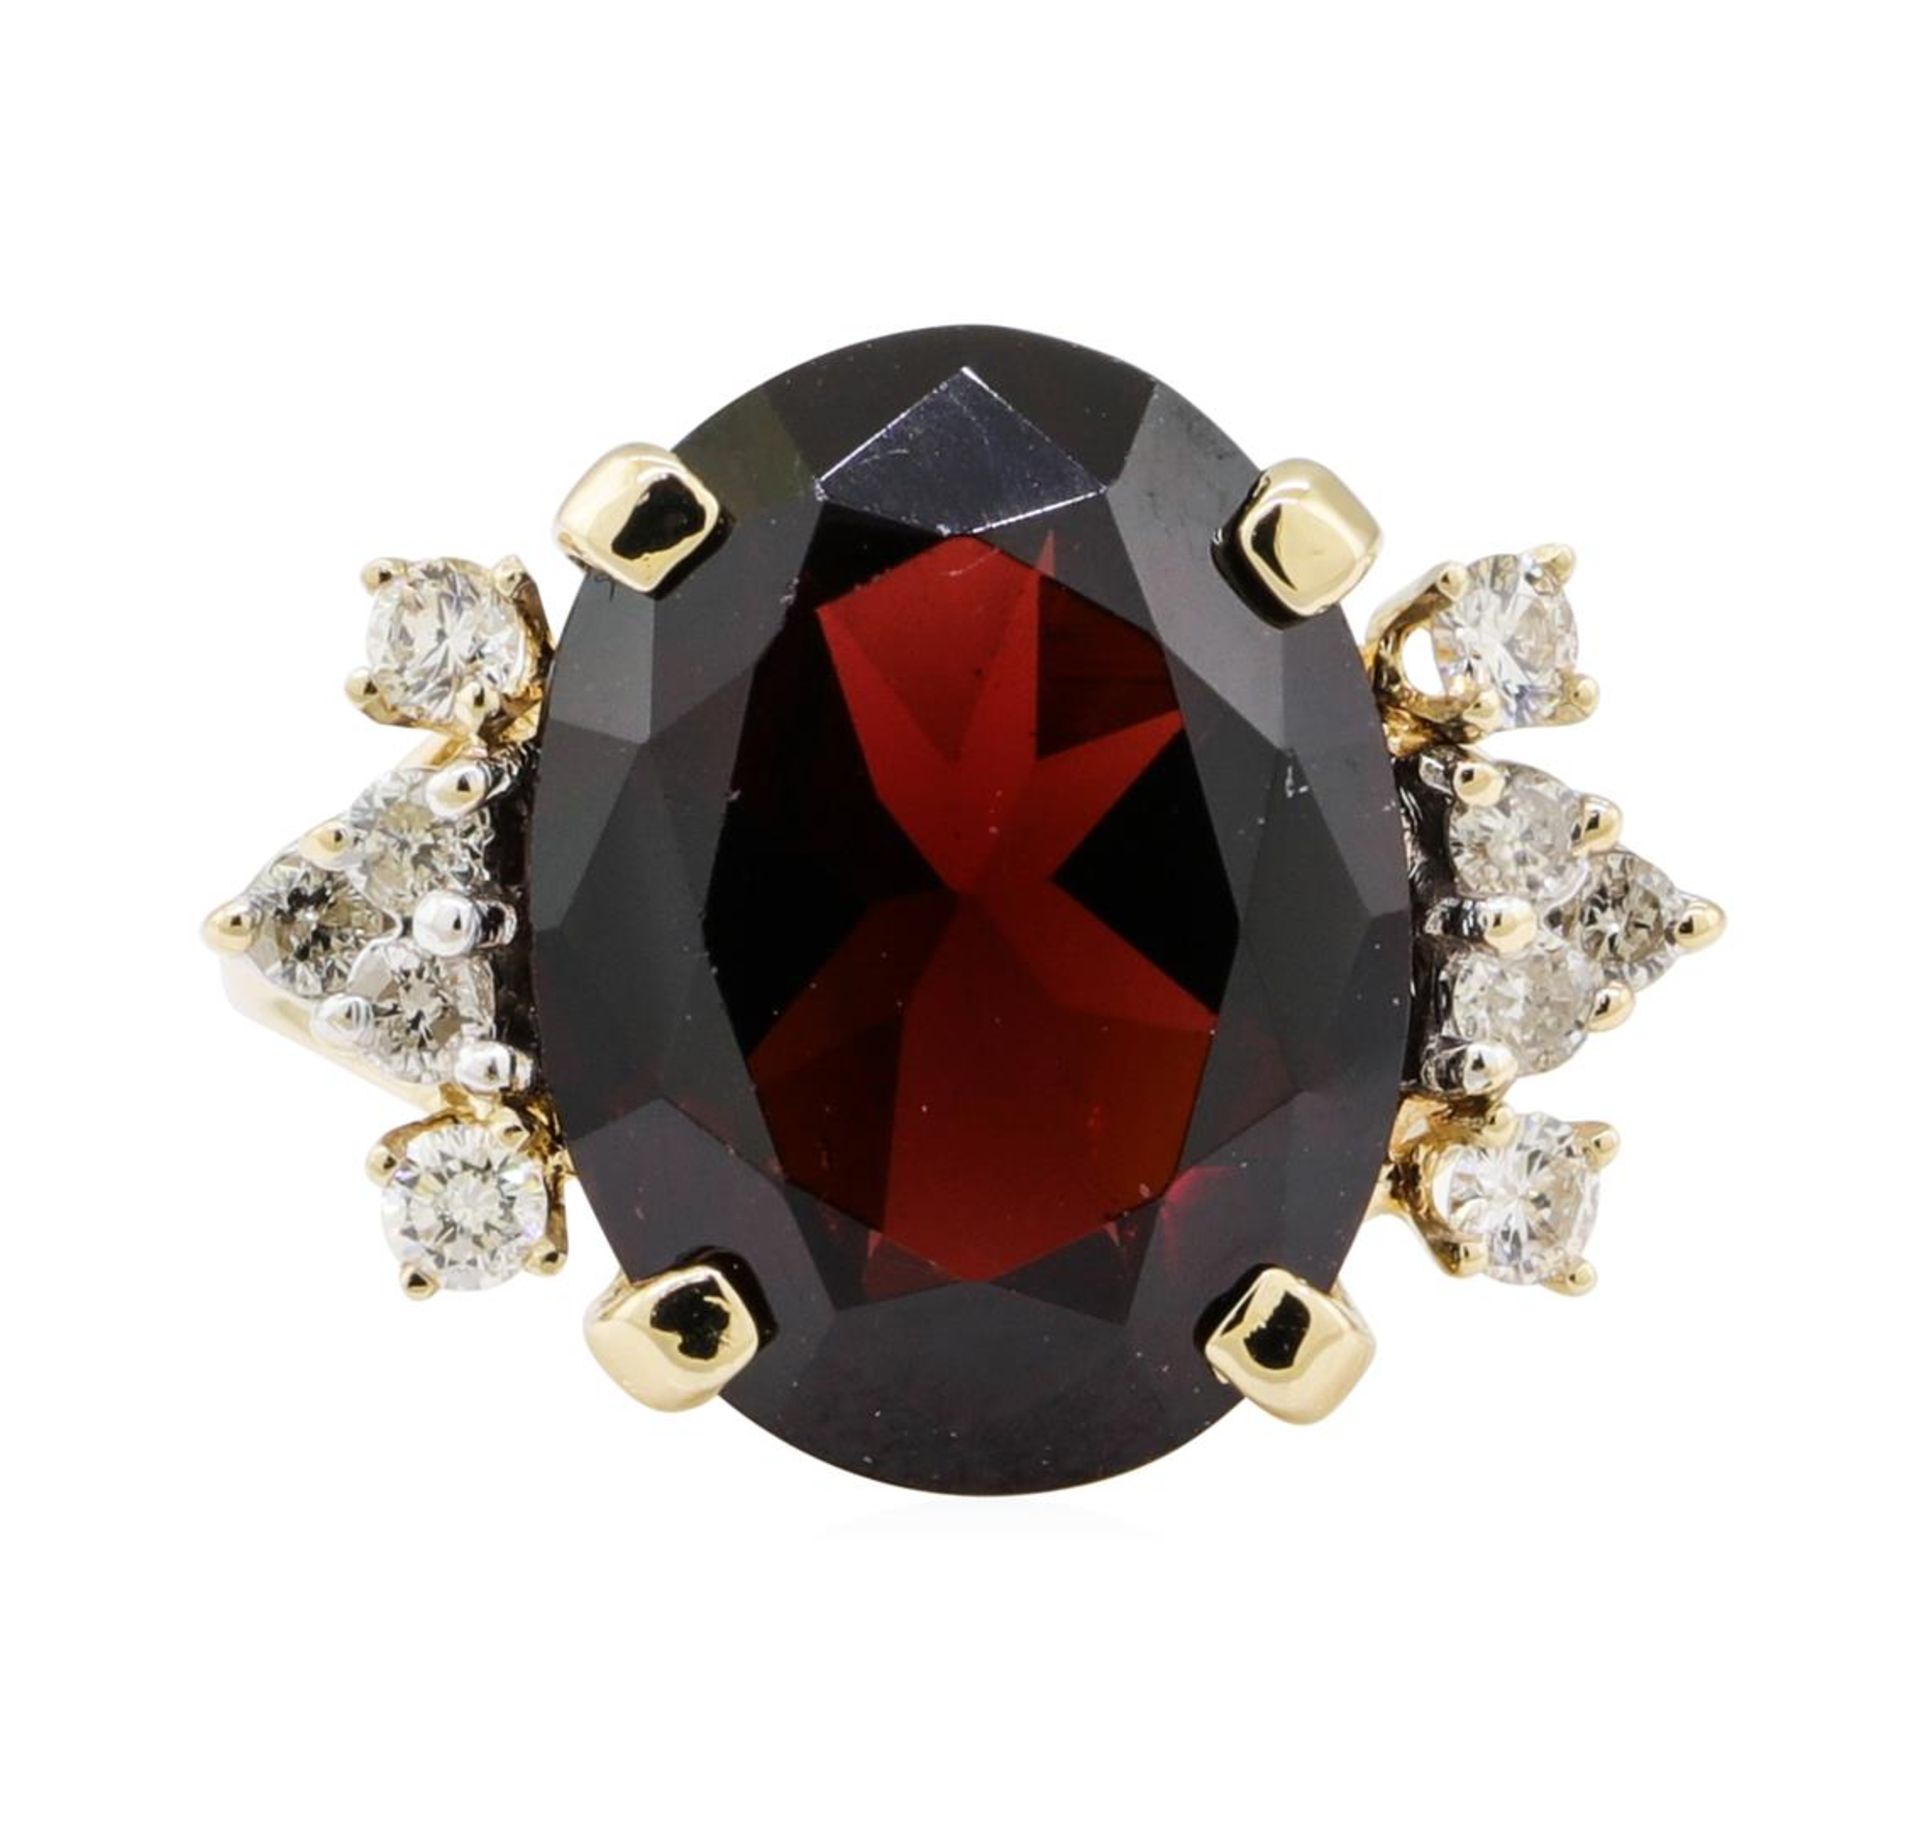 10.20 ctw Garnet and Diamond Ring - 14KT Yellow Gold - Image 2 of 4